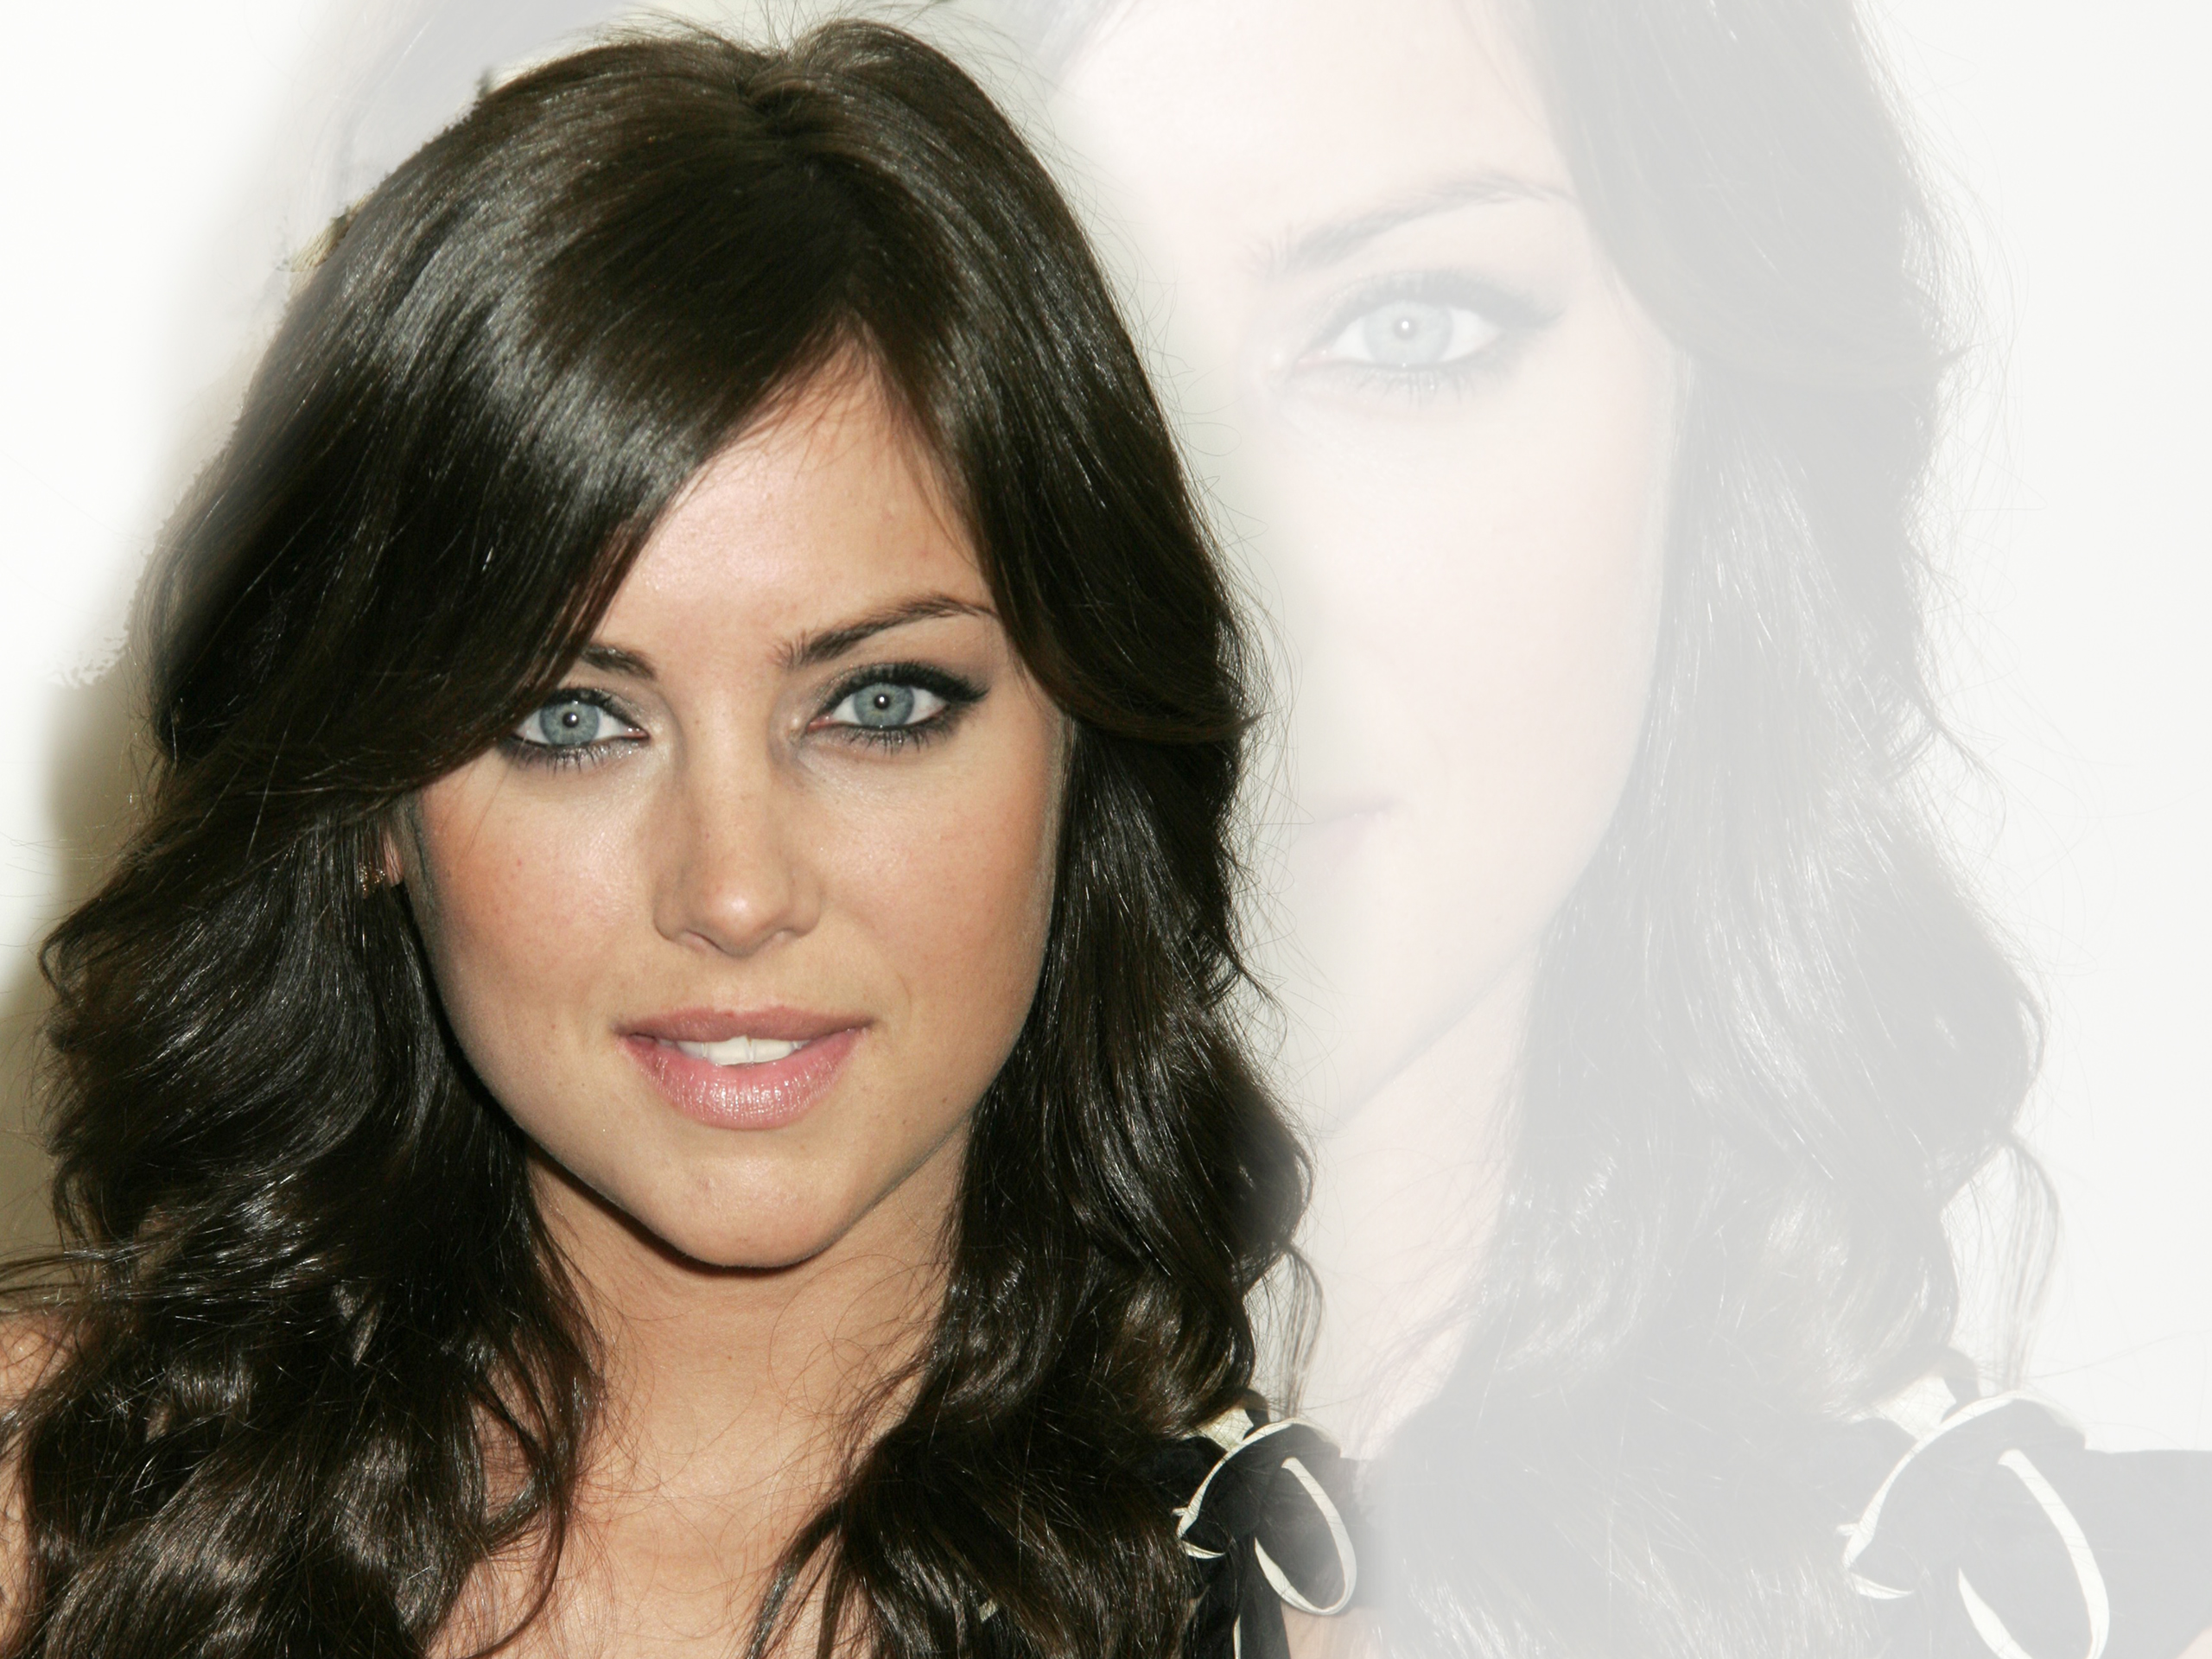 Jessica Stroup Wallpapers